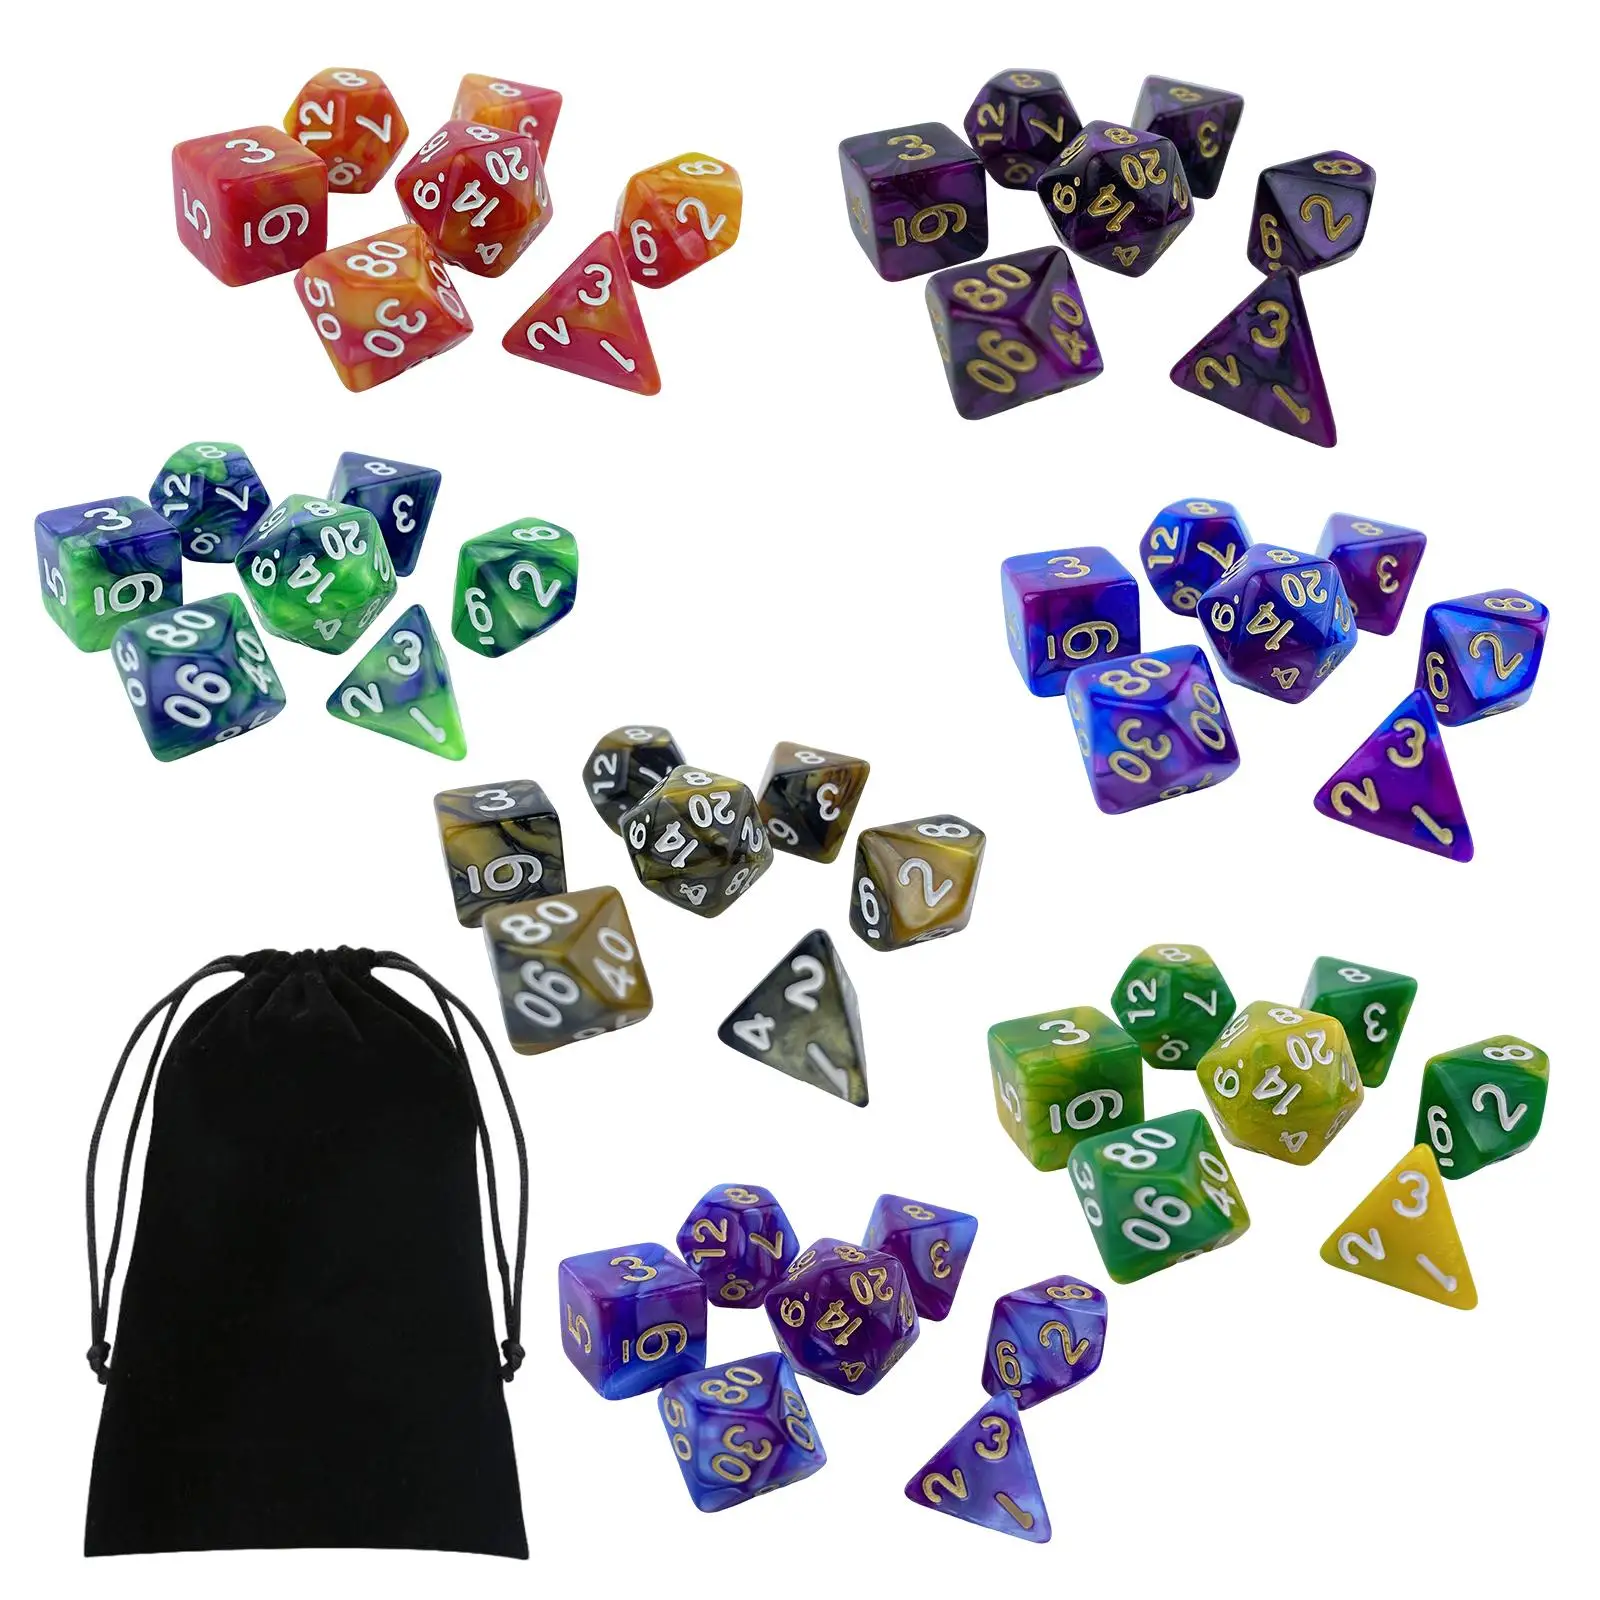 49Pcs Polyhedral Dices Set with Storage Bag Toy for KTV Roll Playing Games